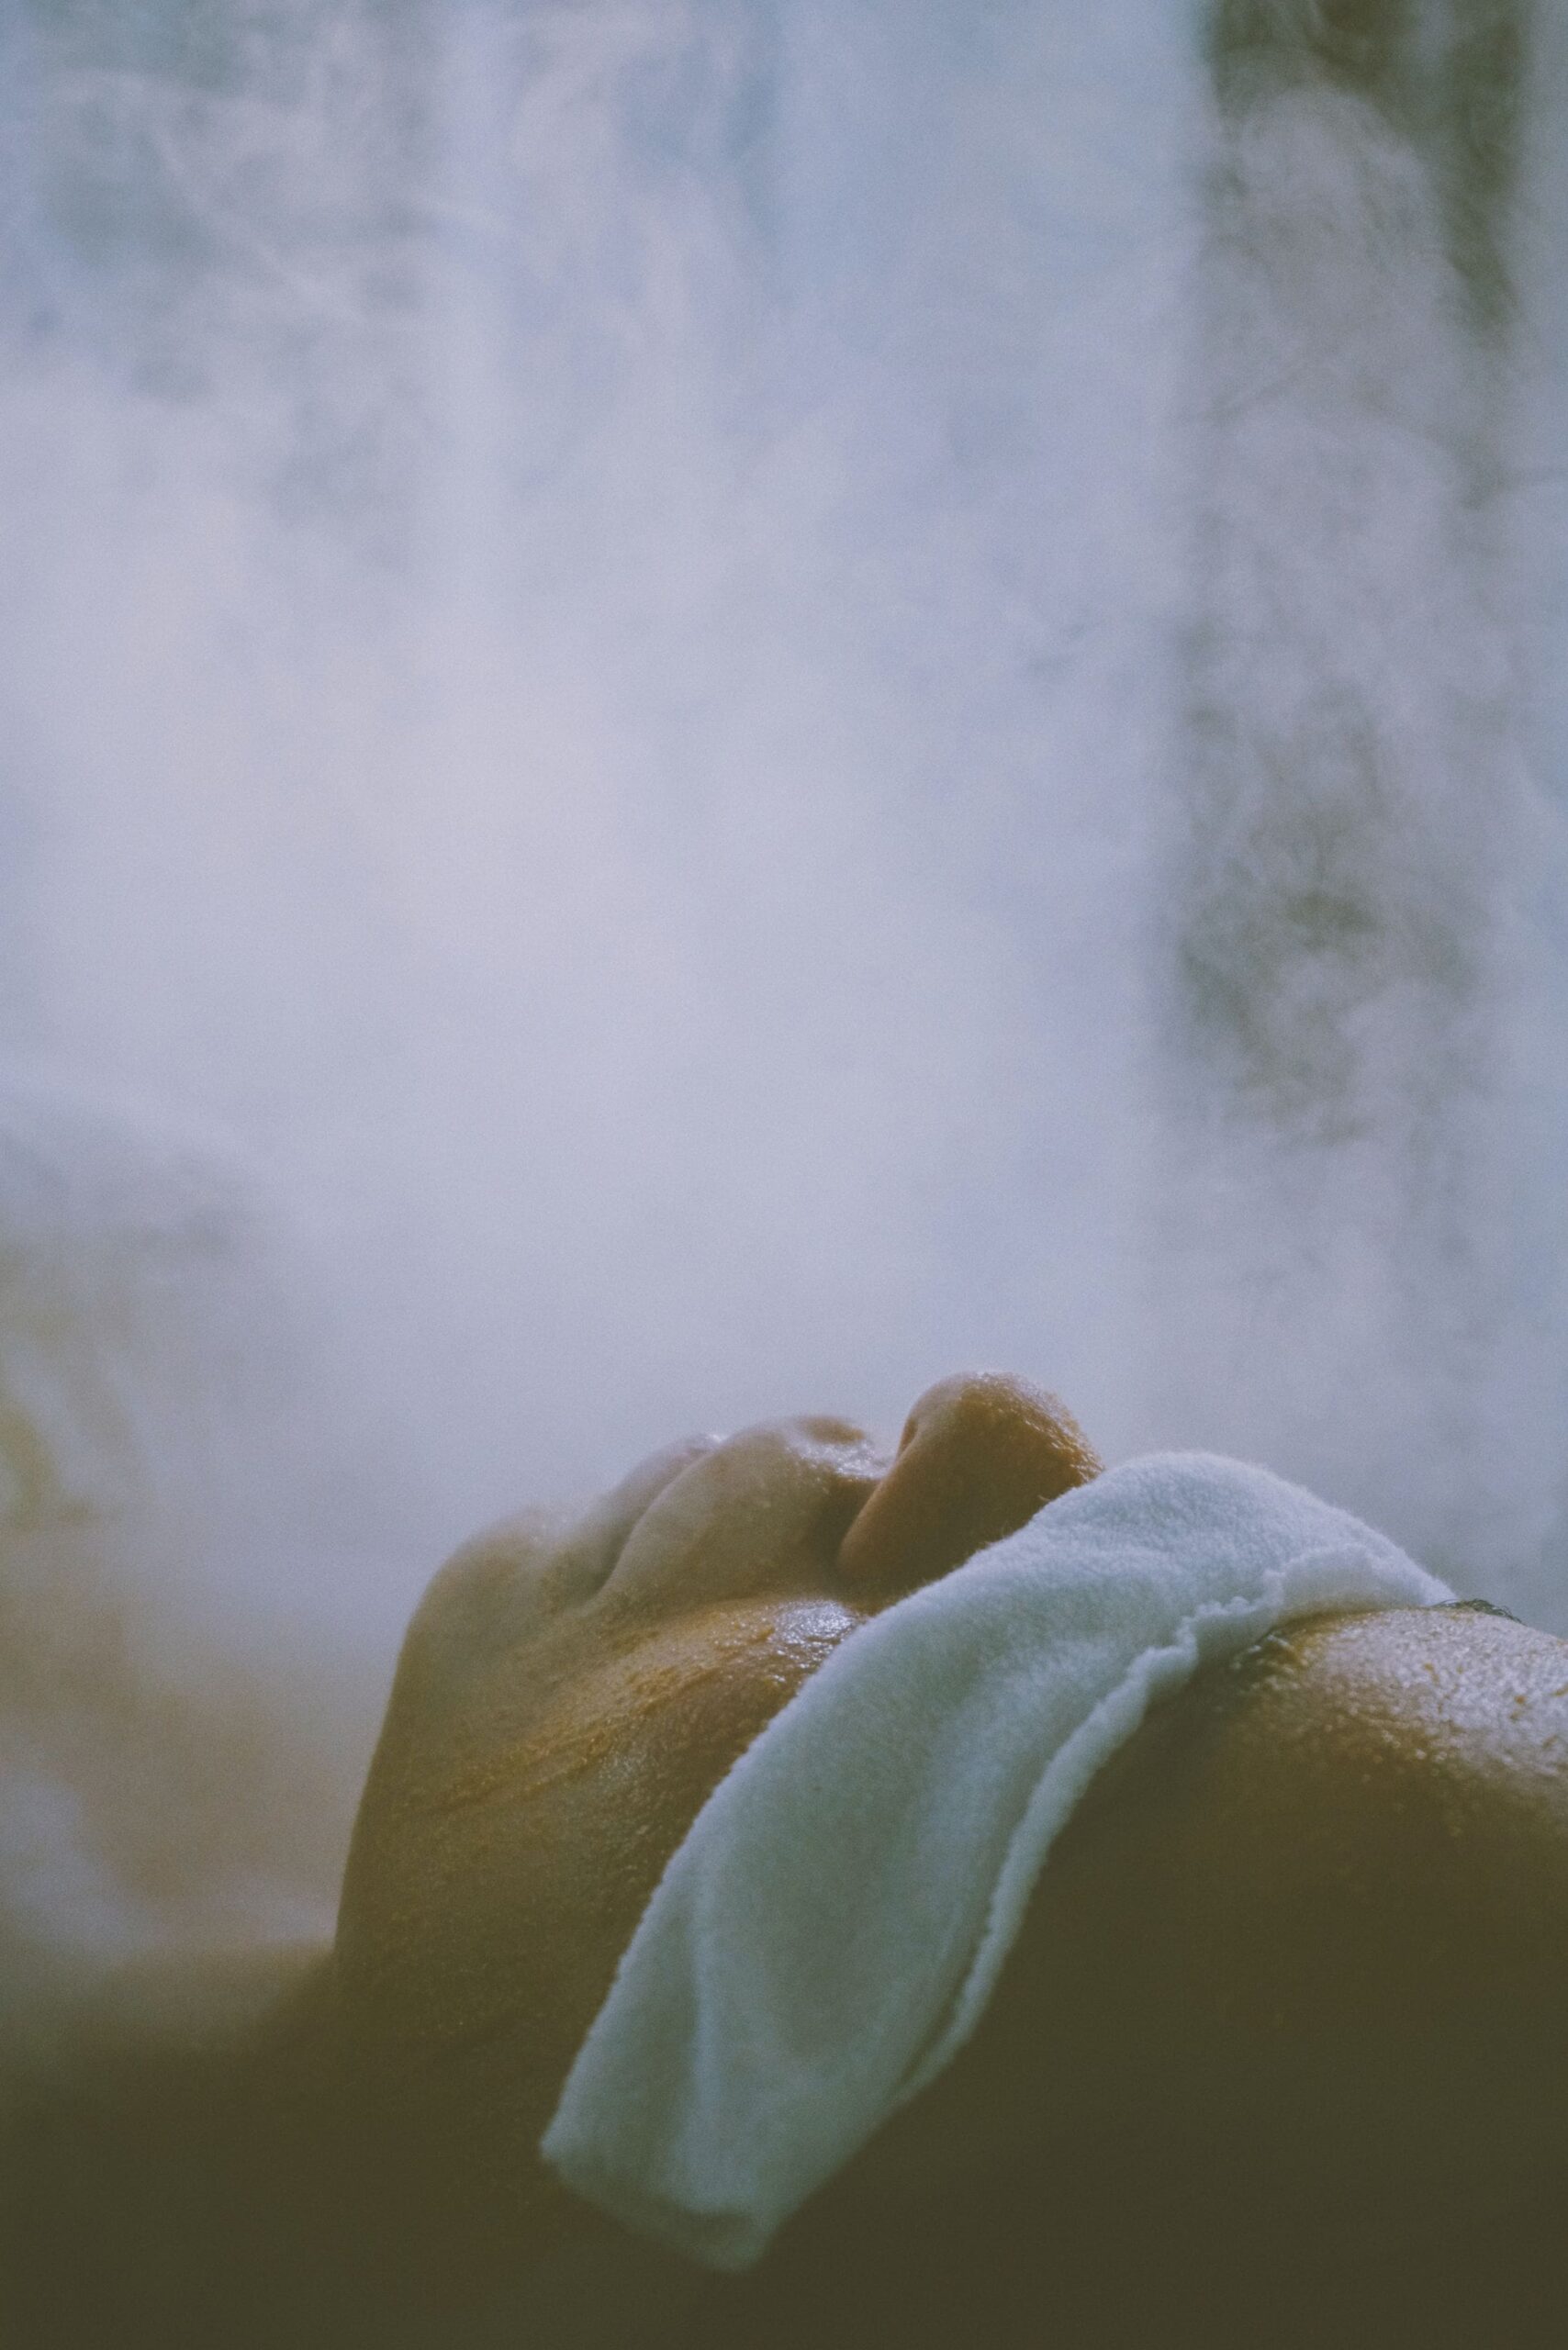 An image of a woman getting her face steamed during a facial.